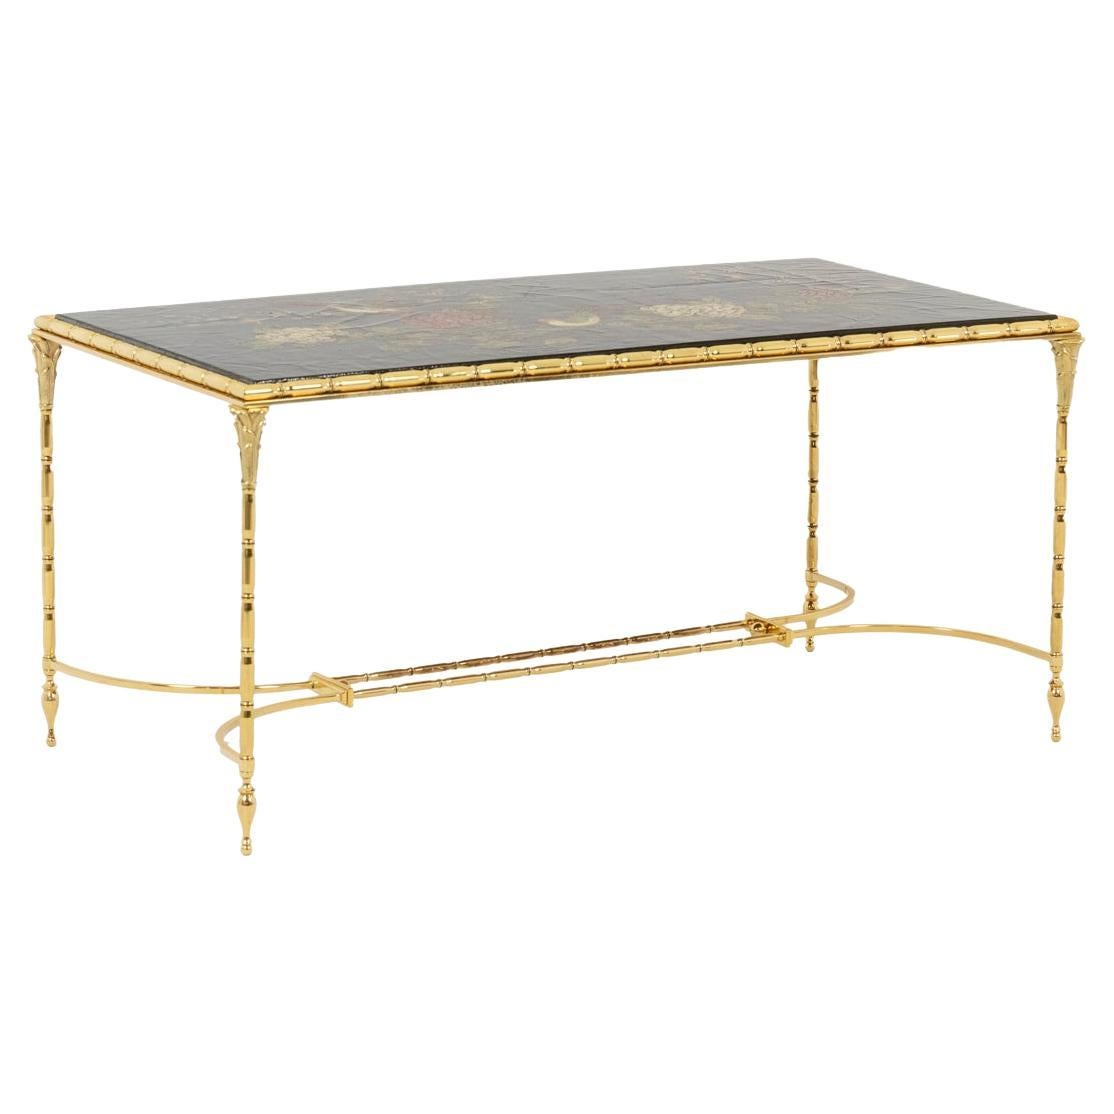 Maison Baguès, Coffee Table in Lacquer and Bronze, 1950s For Sale